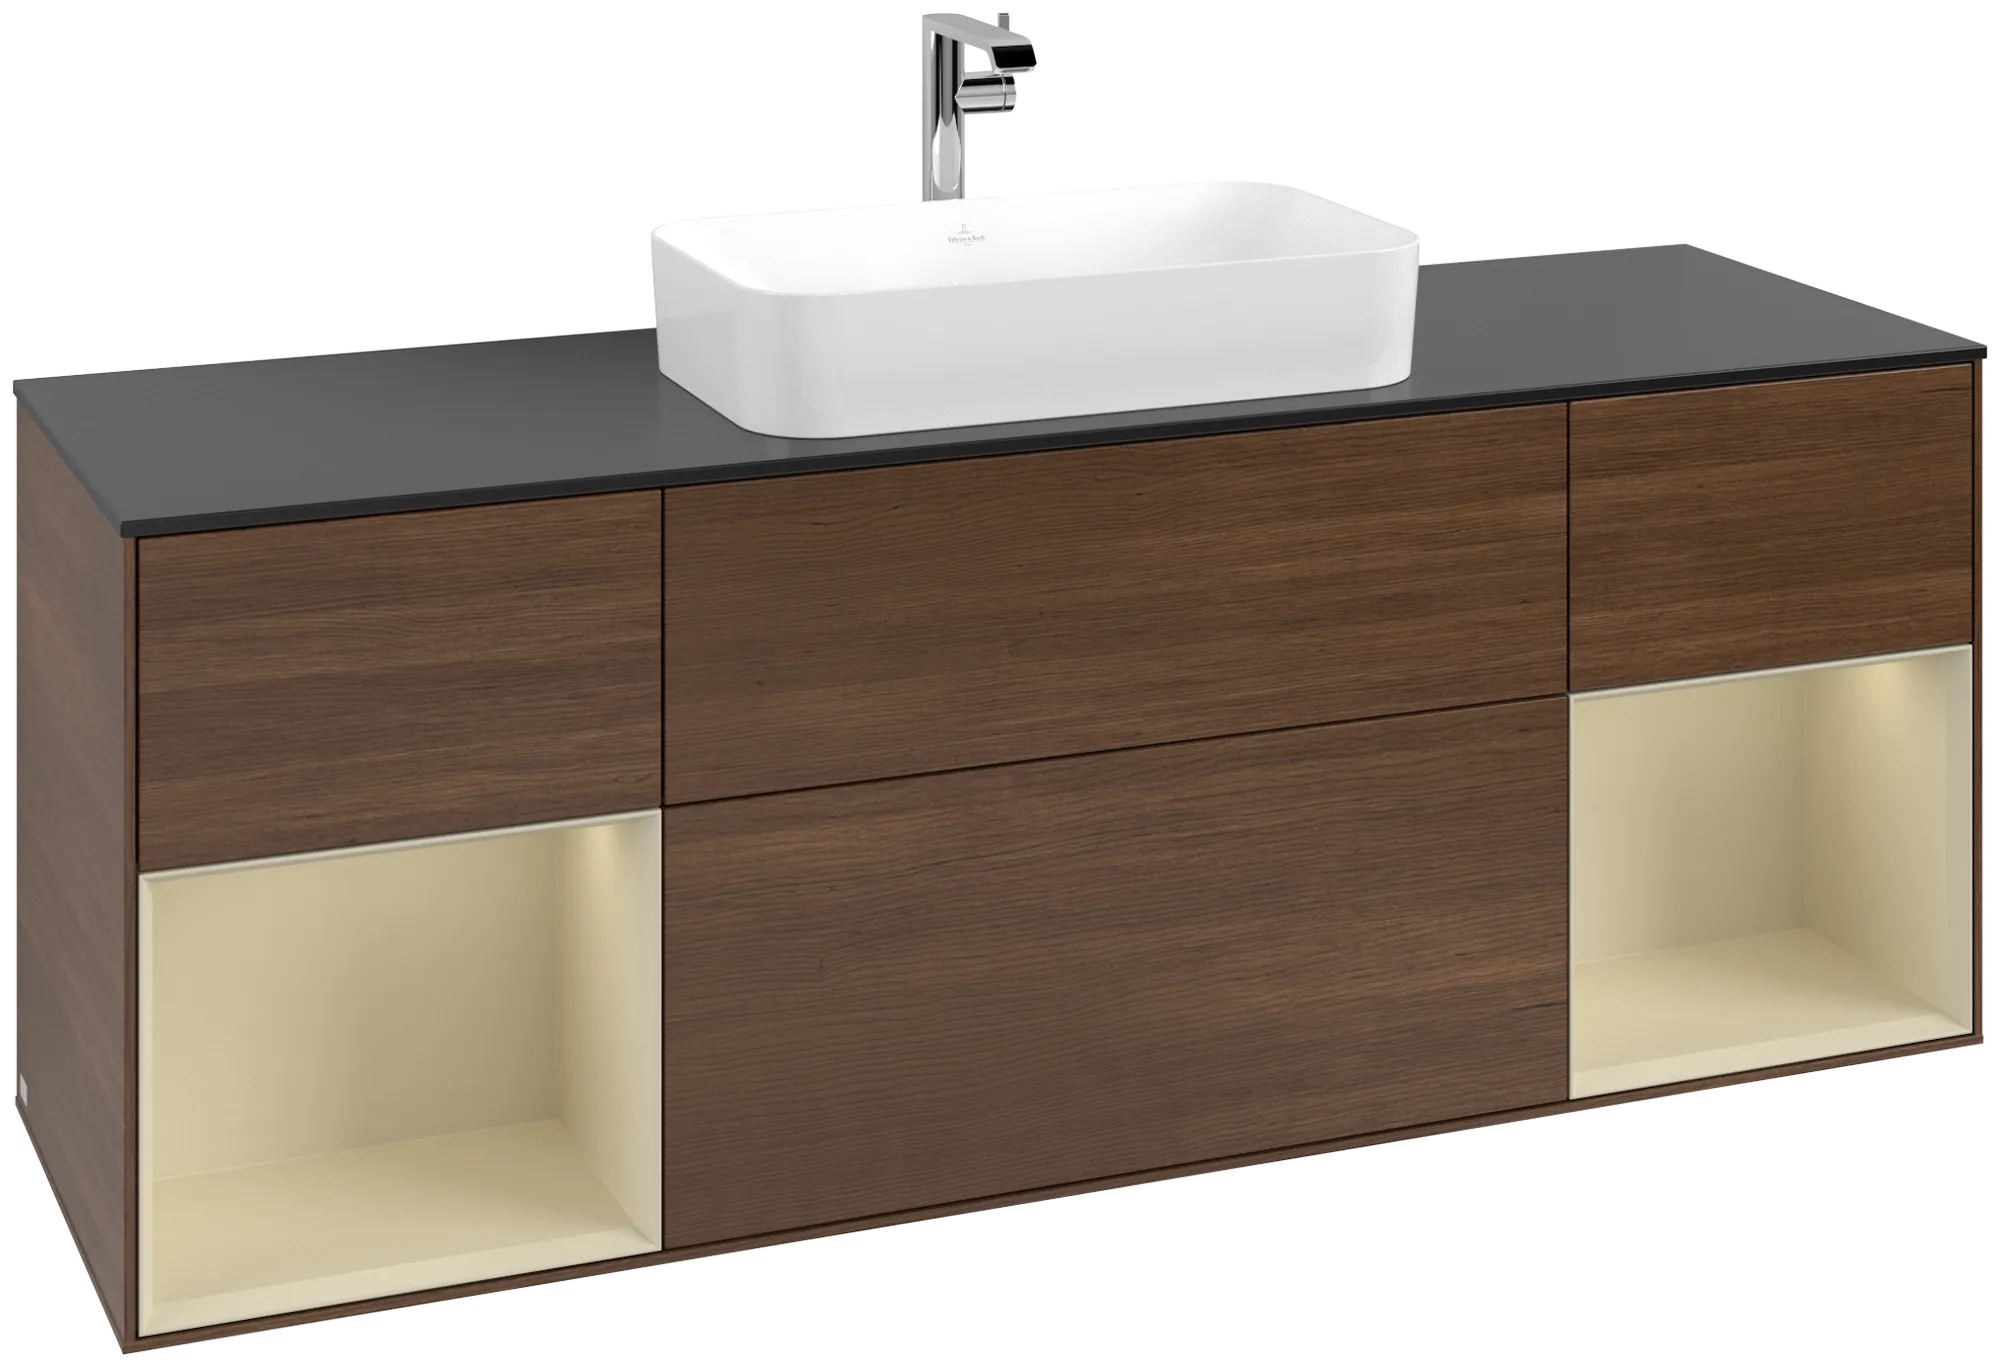 Picture of VILLEROY BOCH Finion Vanity unit, with lighting, 4 pull-out compartments, 1600 x 603 x 501 mm, Walnut Veneer / Silk Grey Matt Lacquer / Glass Black Matt #G332HJGN